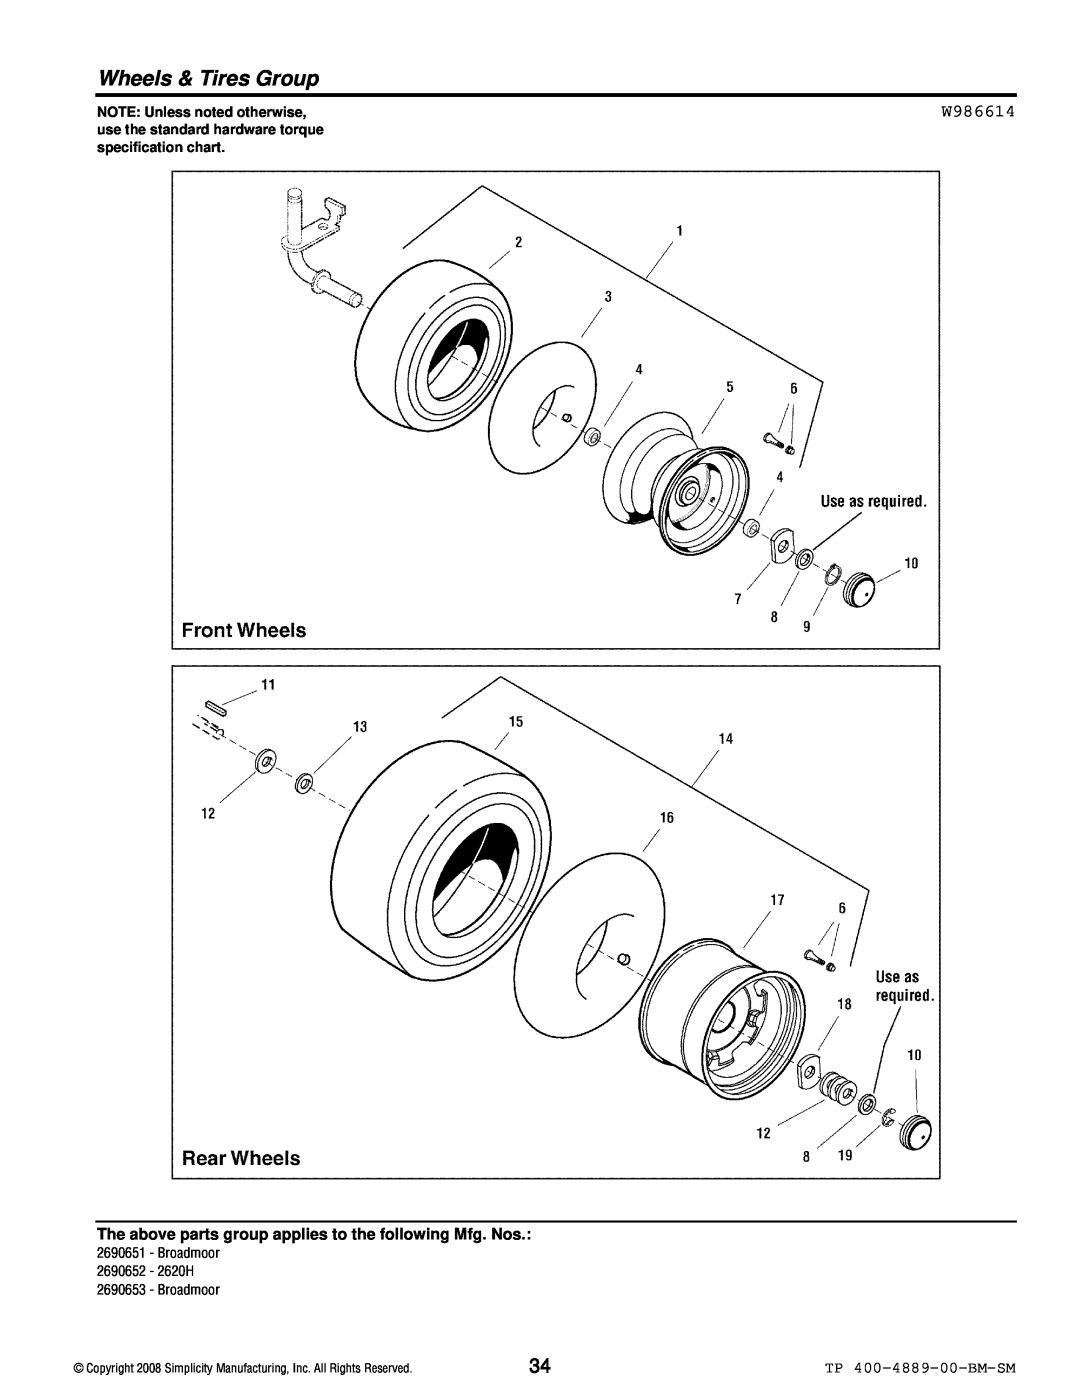 Simplicity 2600 Series manual Wheels & Tires Group, W986614, TP 400-4889-00-BM-SM, NOTE: Unless noted otherwise 